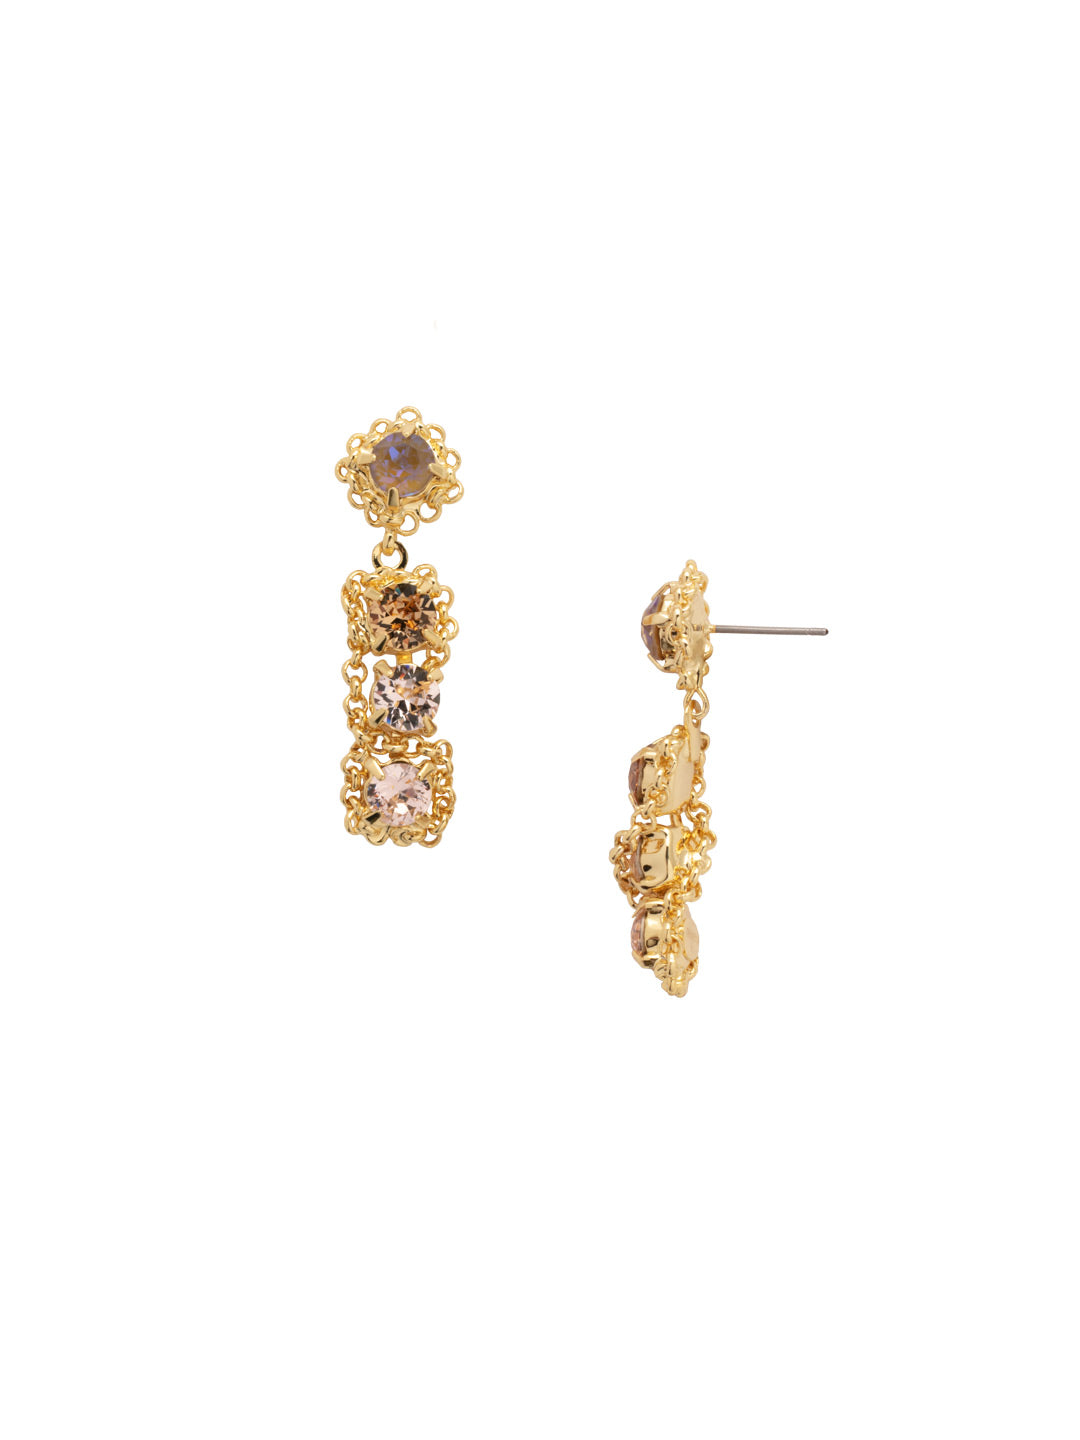 Brandi Dangle Earring - EFC62BGRSU - <p>The Brandi Dangle Earrings feature classic crystals dangling from a post, elevated with a braided chain design. From Sorrelli's Raw Sugar collection in our Bright Gold-tone finish.</p>